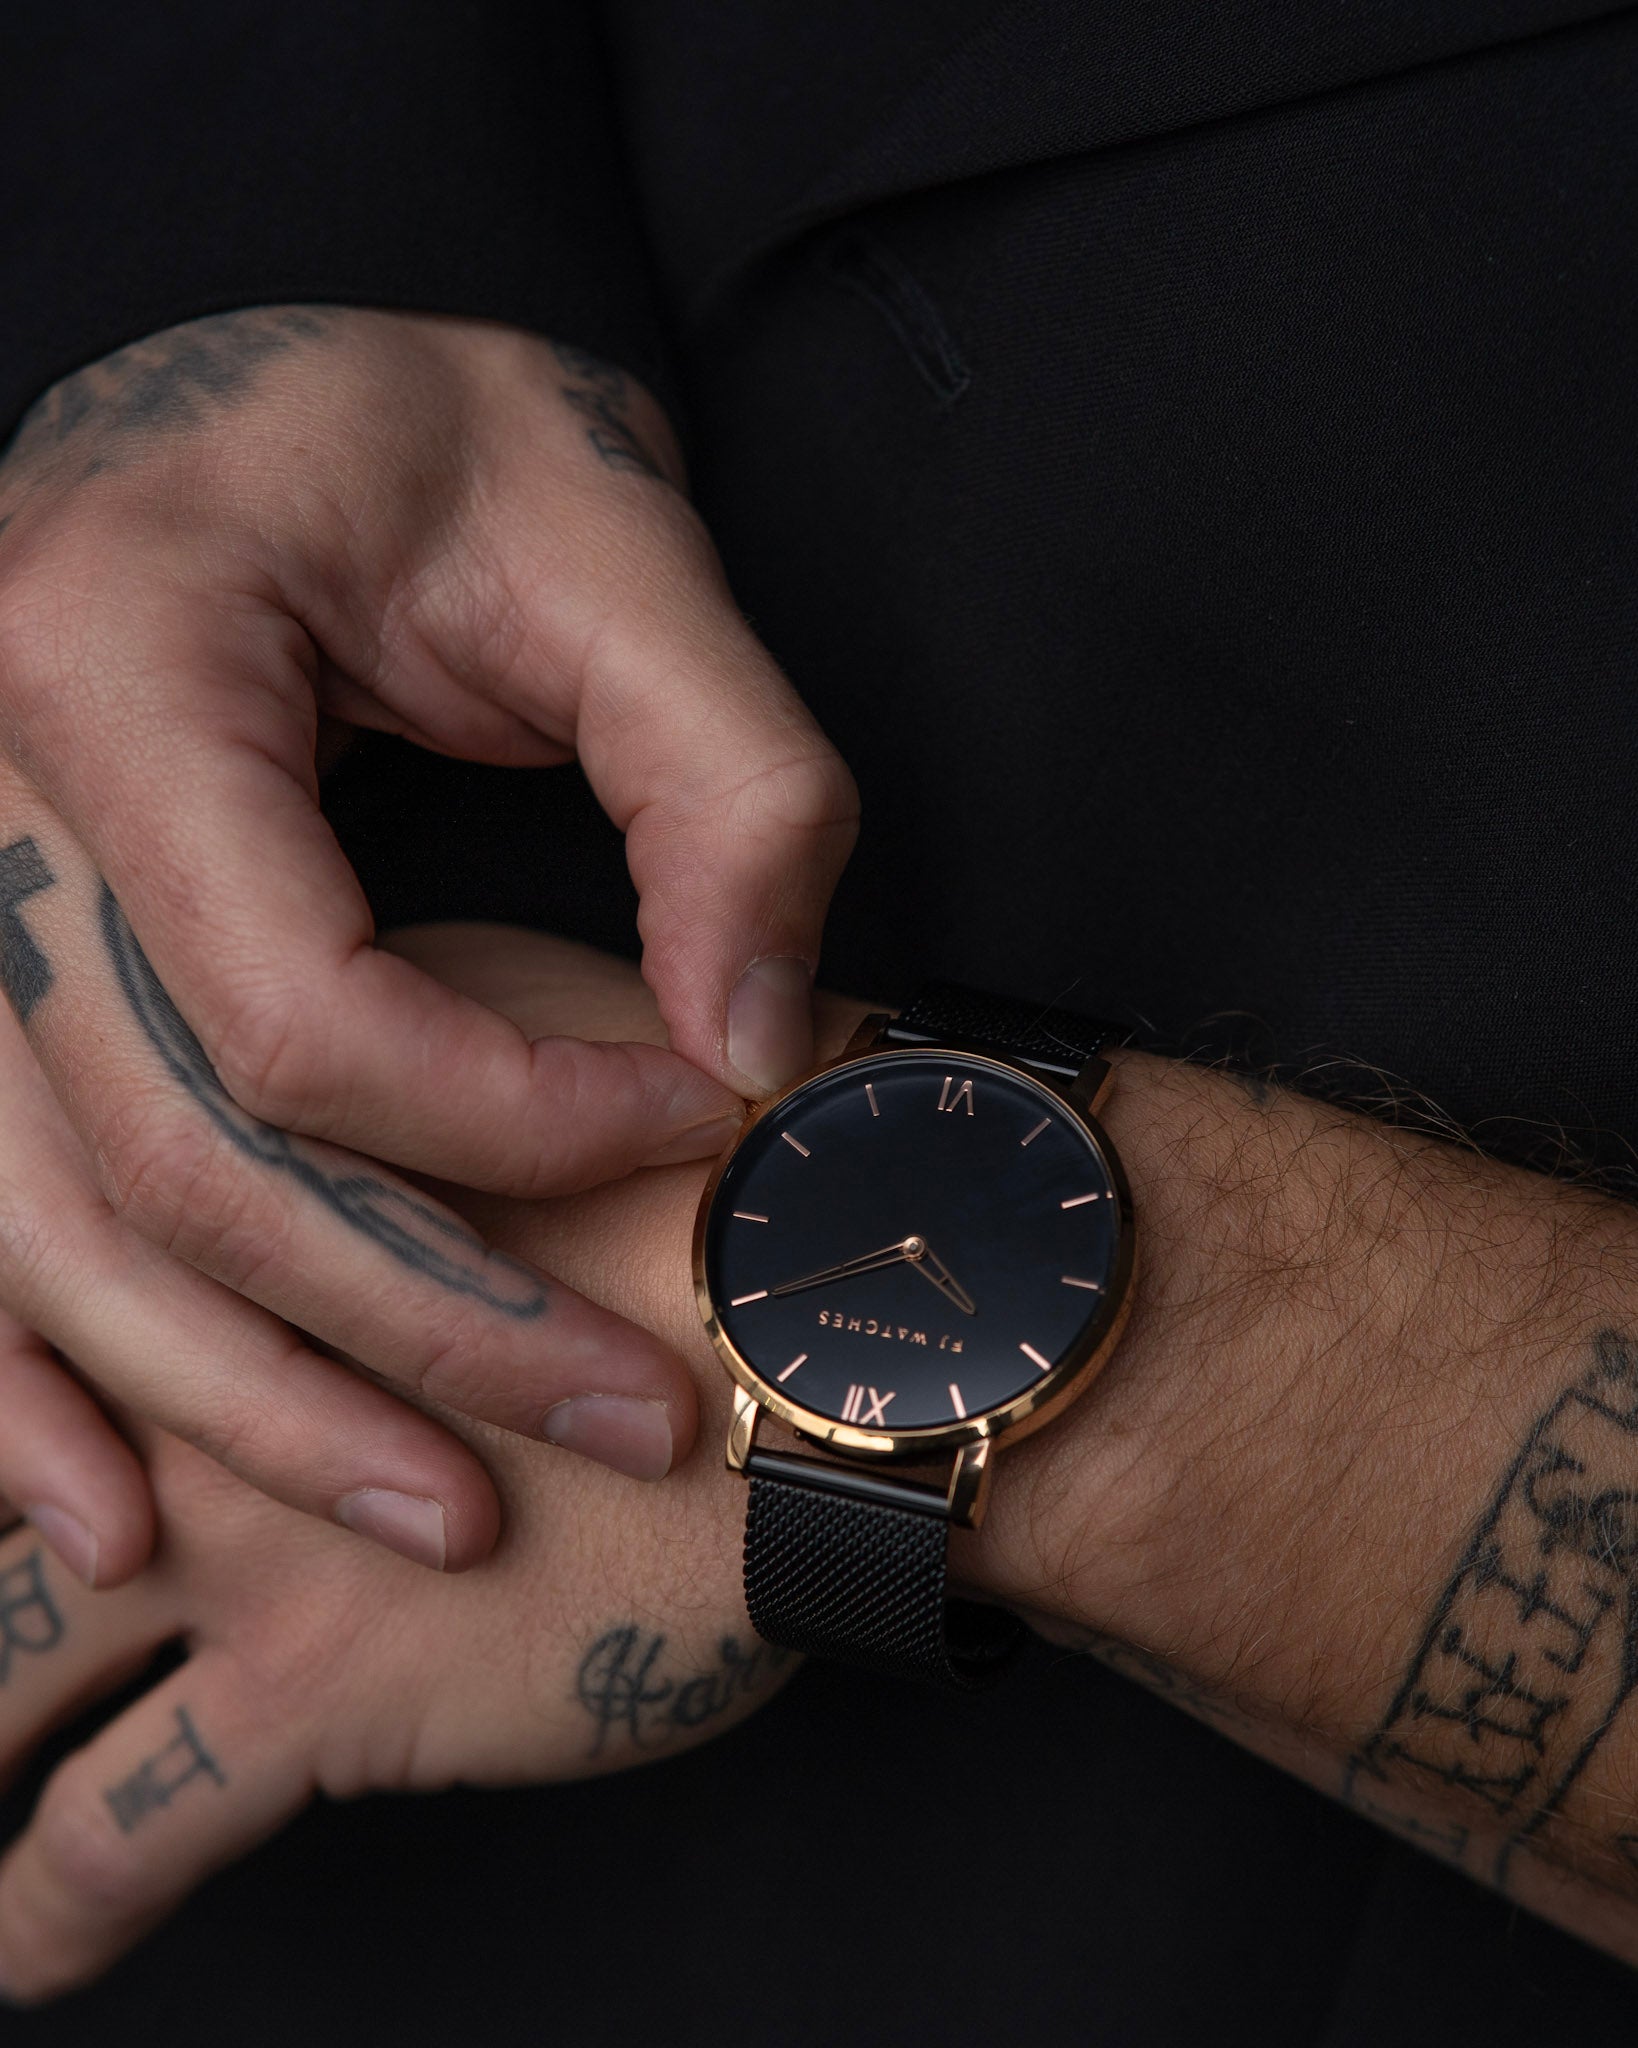 Discover Golden moon, a 36 mm men's watch from Five Jwlry with a black and rose gold dial. This one comes with a black mesh bracelet!